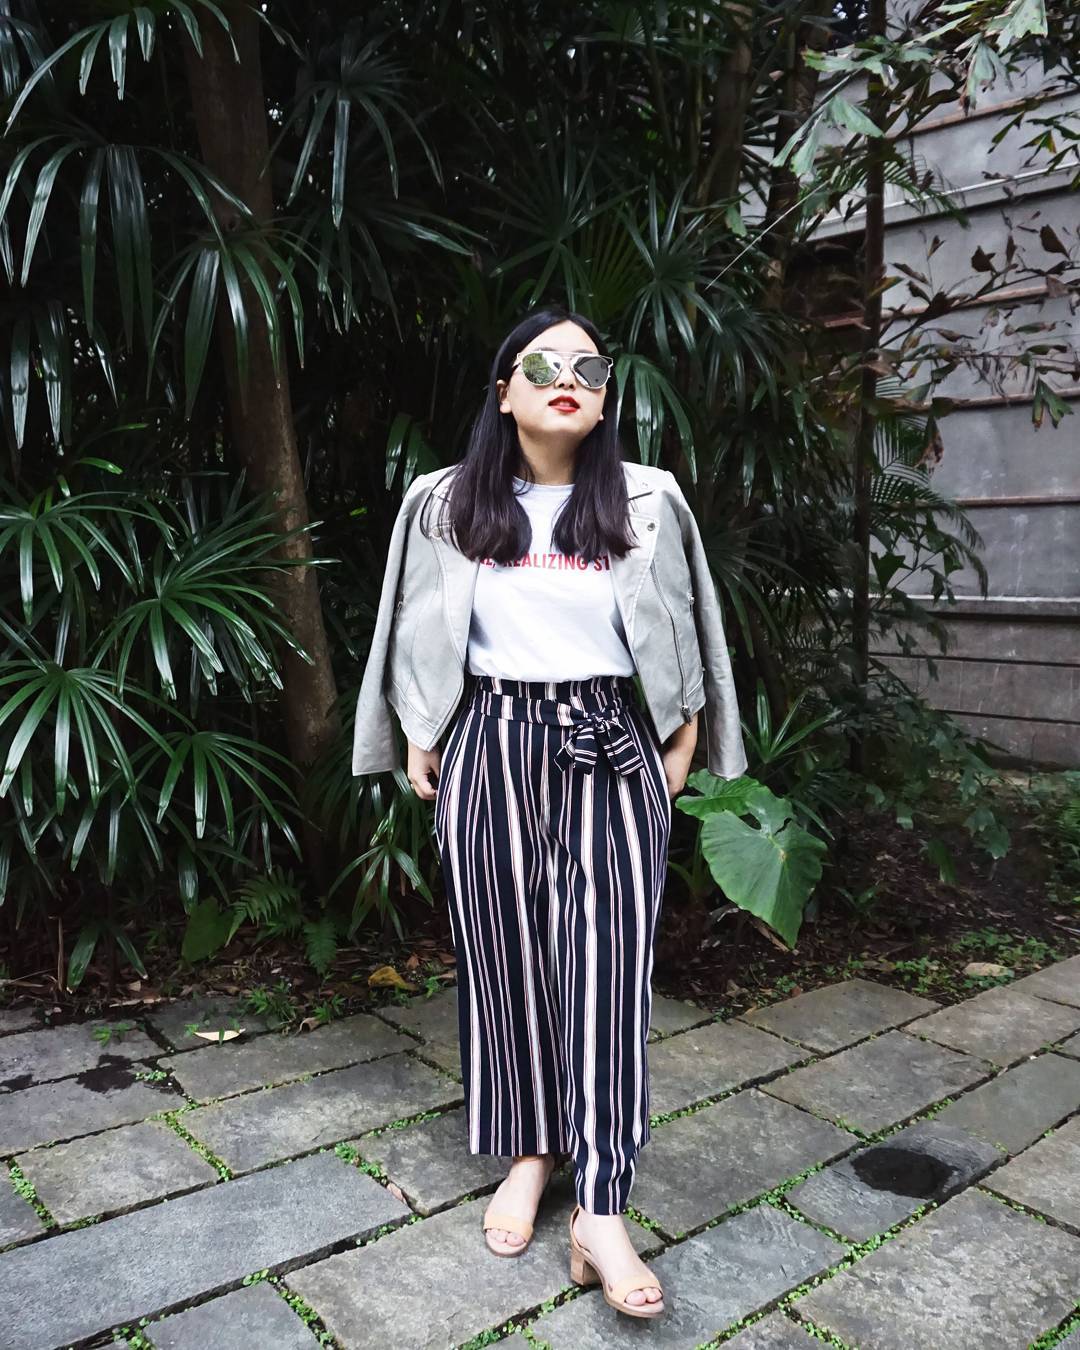 6 New Changes to My site + Stripe Wide Leg Pants - Dawn P. Darnell | Striped  wide leg pants, Wide pants outfit, Stripped pants outfit